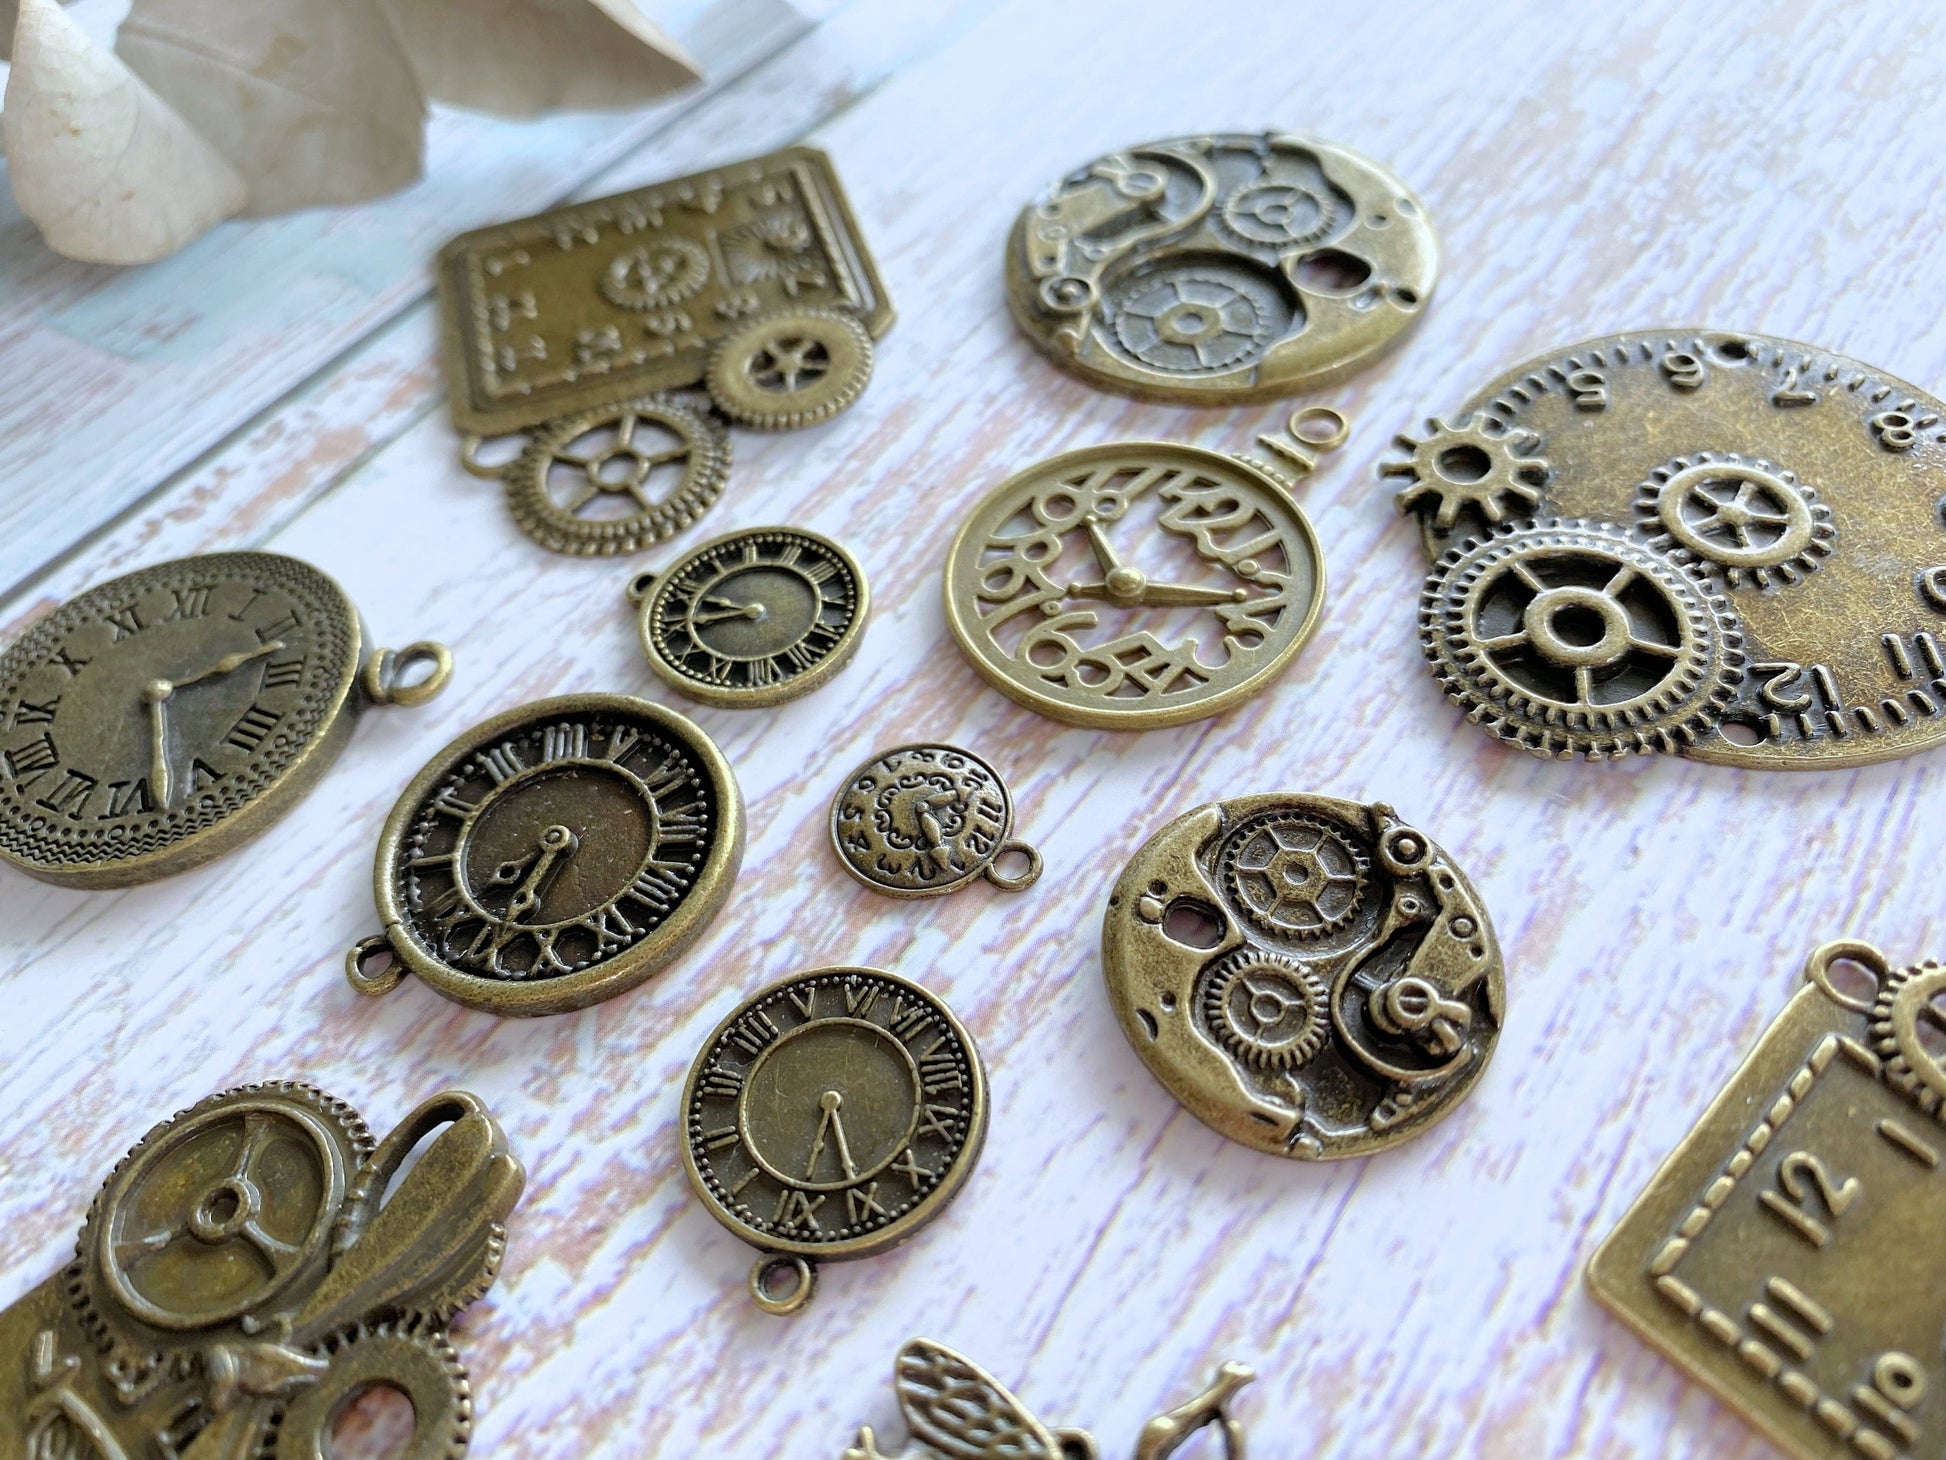 Charmed by Dragons Steampunk Watch Parts and Pieces - 1 oz - 250 Plus Pieces of Tiny Vintage Gears, Wheels, Hands, Crowns, Cogs and Stems for Jewelry and Crafts (1 oz